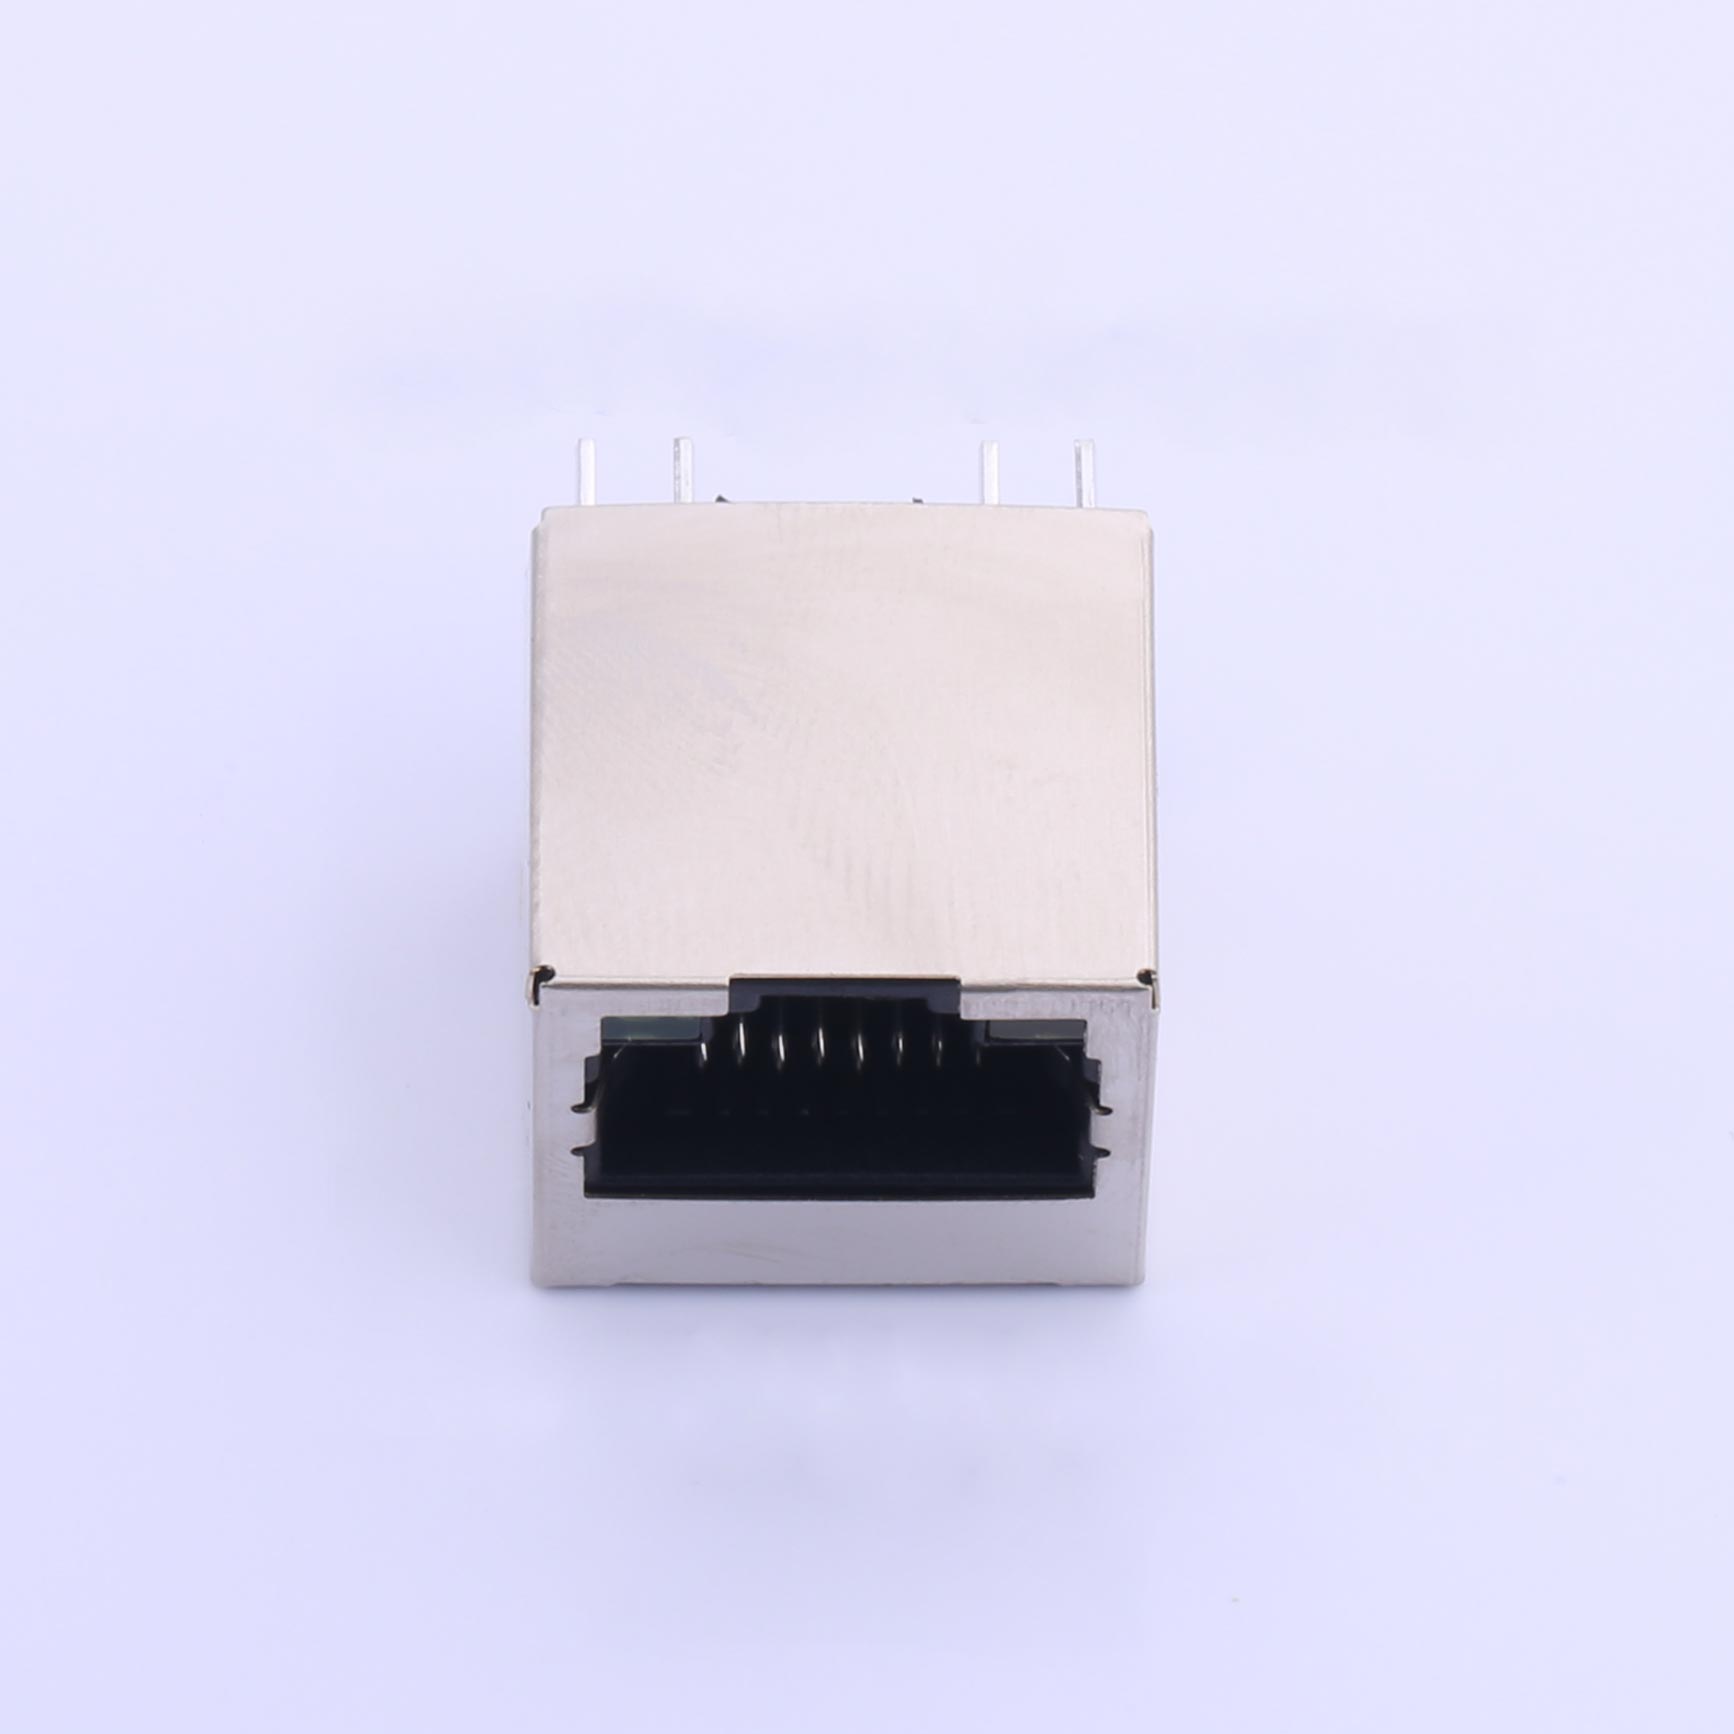 Kinghelm Network interface 1x1 single port 8P8C RJ45 female Ethernet connector with LED indicator